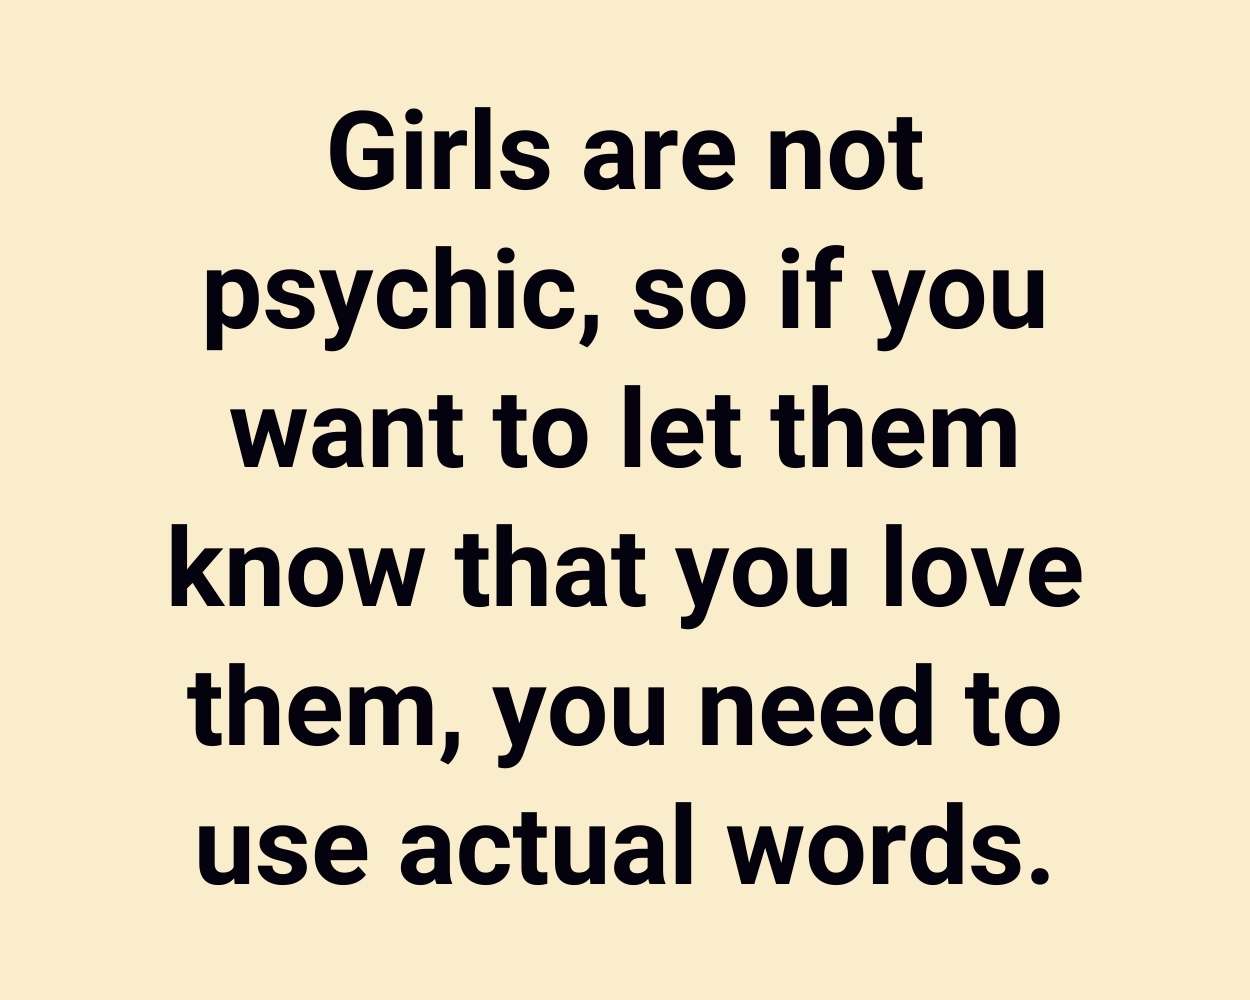 Girls are not psychic, so if you want to let them know that you love them, you need to use actual words.